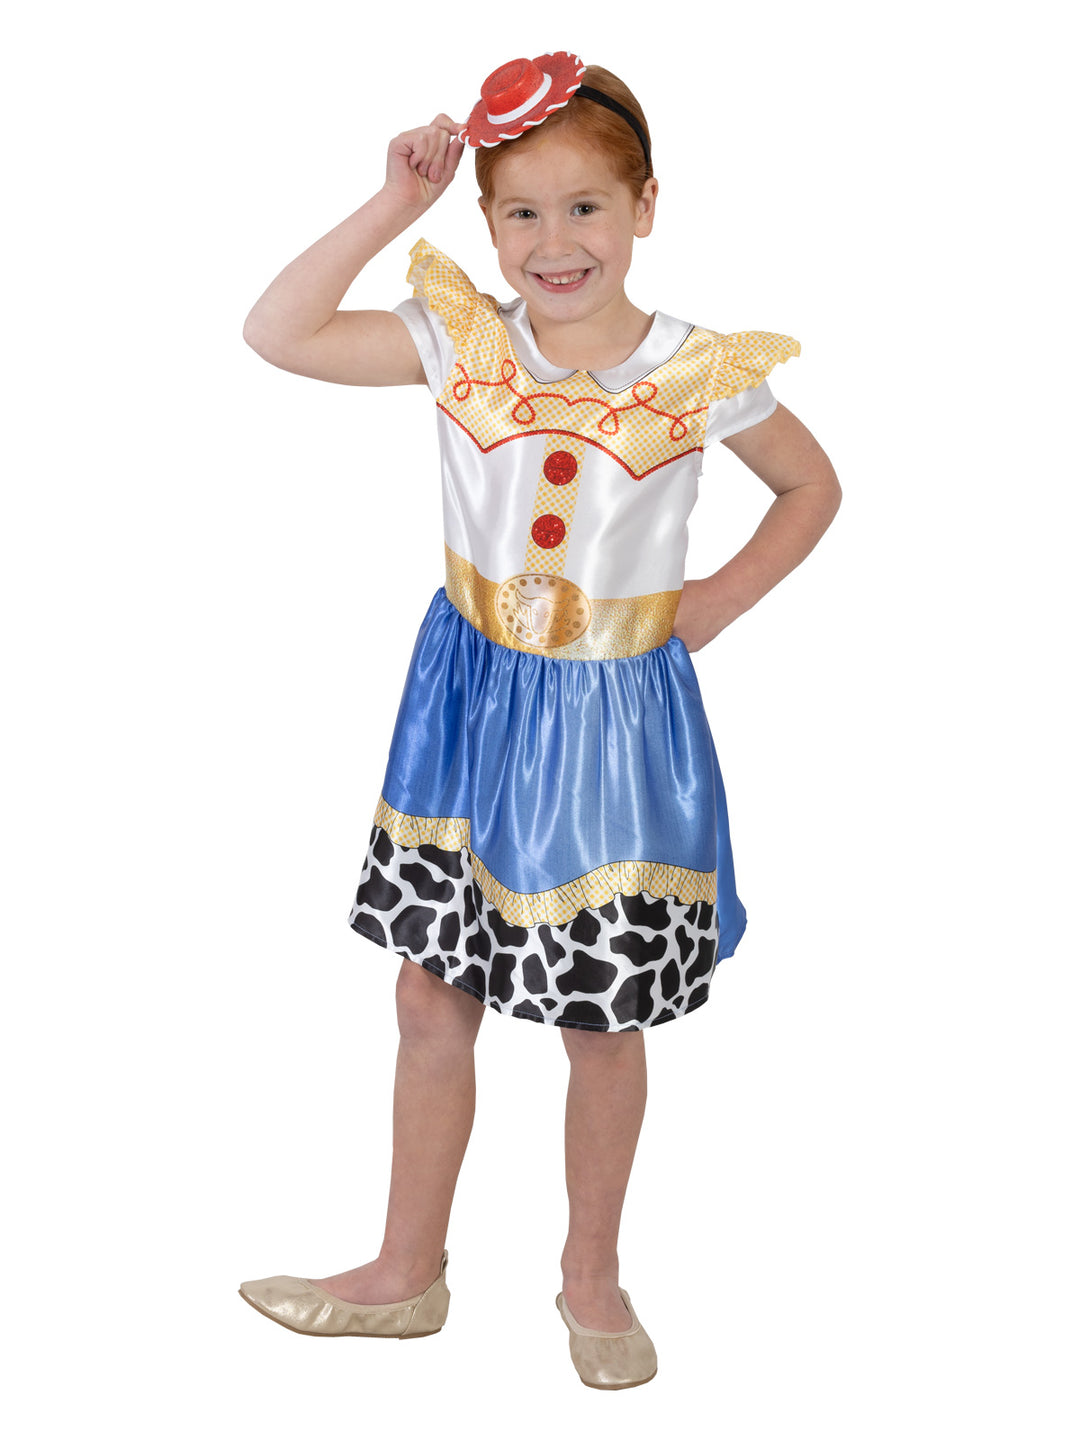 JESSIE TOY STORY COSTUME, CHILD - Little Shop of Horrors